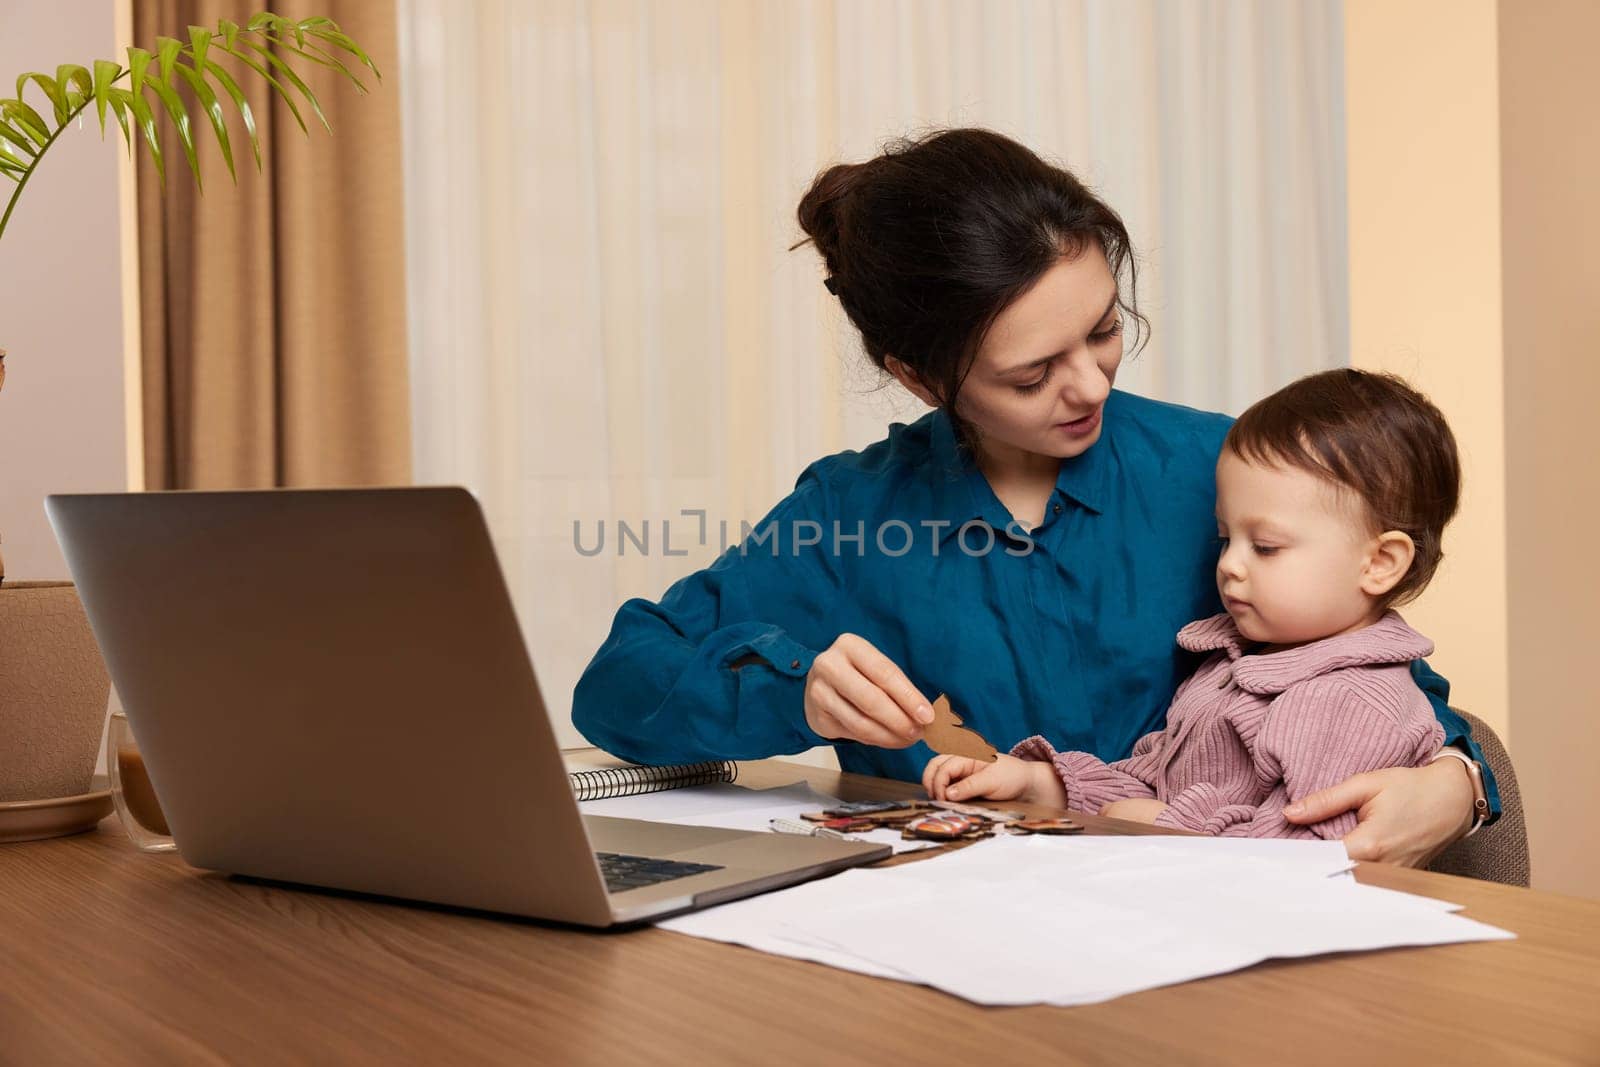 beautiful businesswoman working on laptop with her little child girl at home